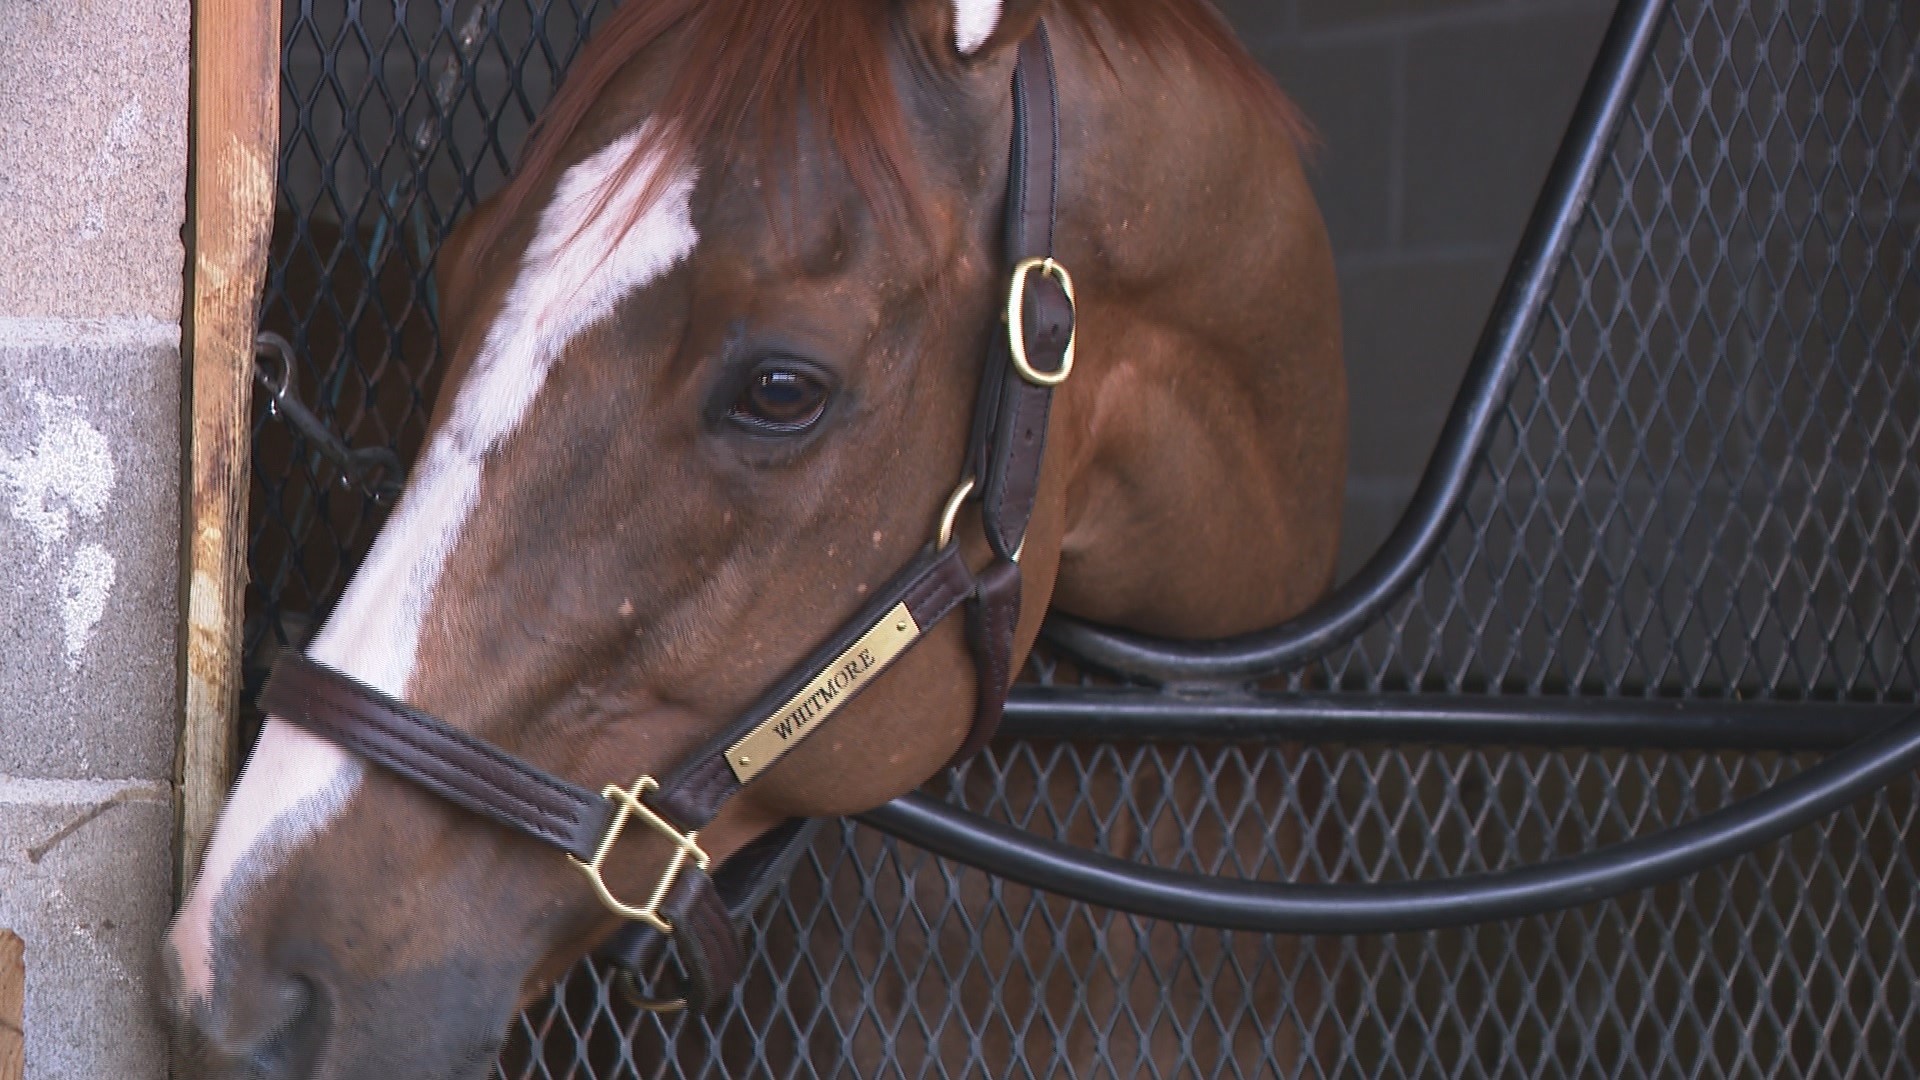 After running a disappointing 19th in the 2016 Kentucky Derby, Whitmore has become a champion sprinter, and became the oldest horse to win the Breeders Cup Sprint